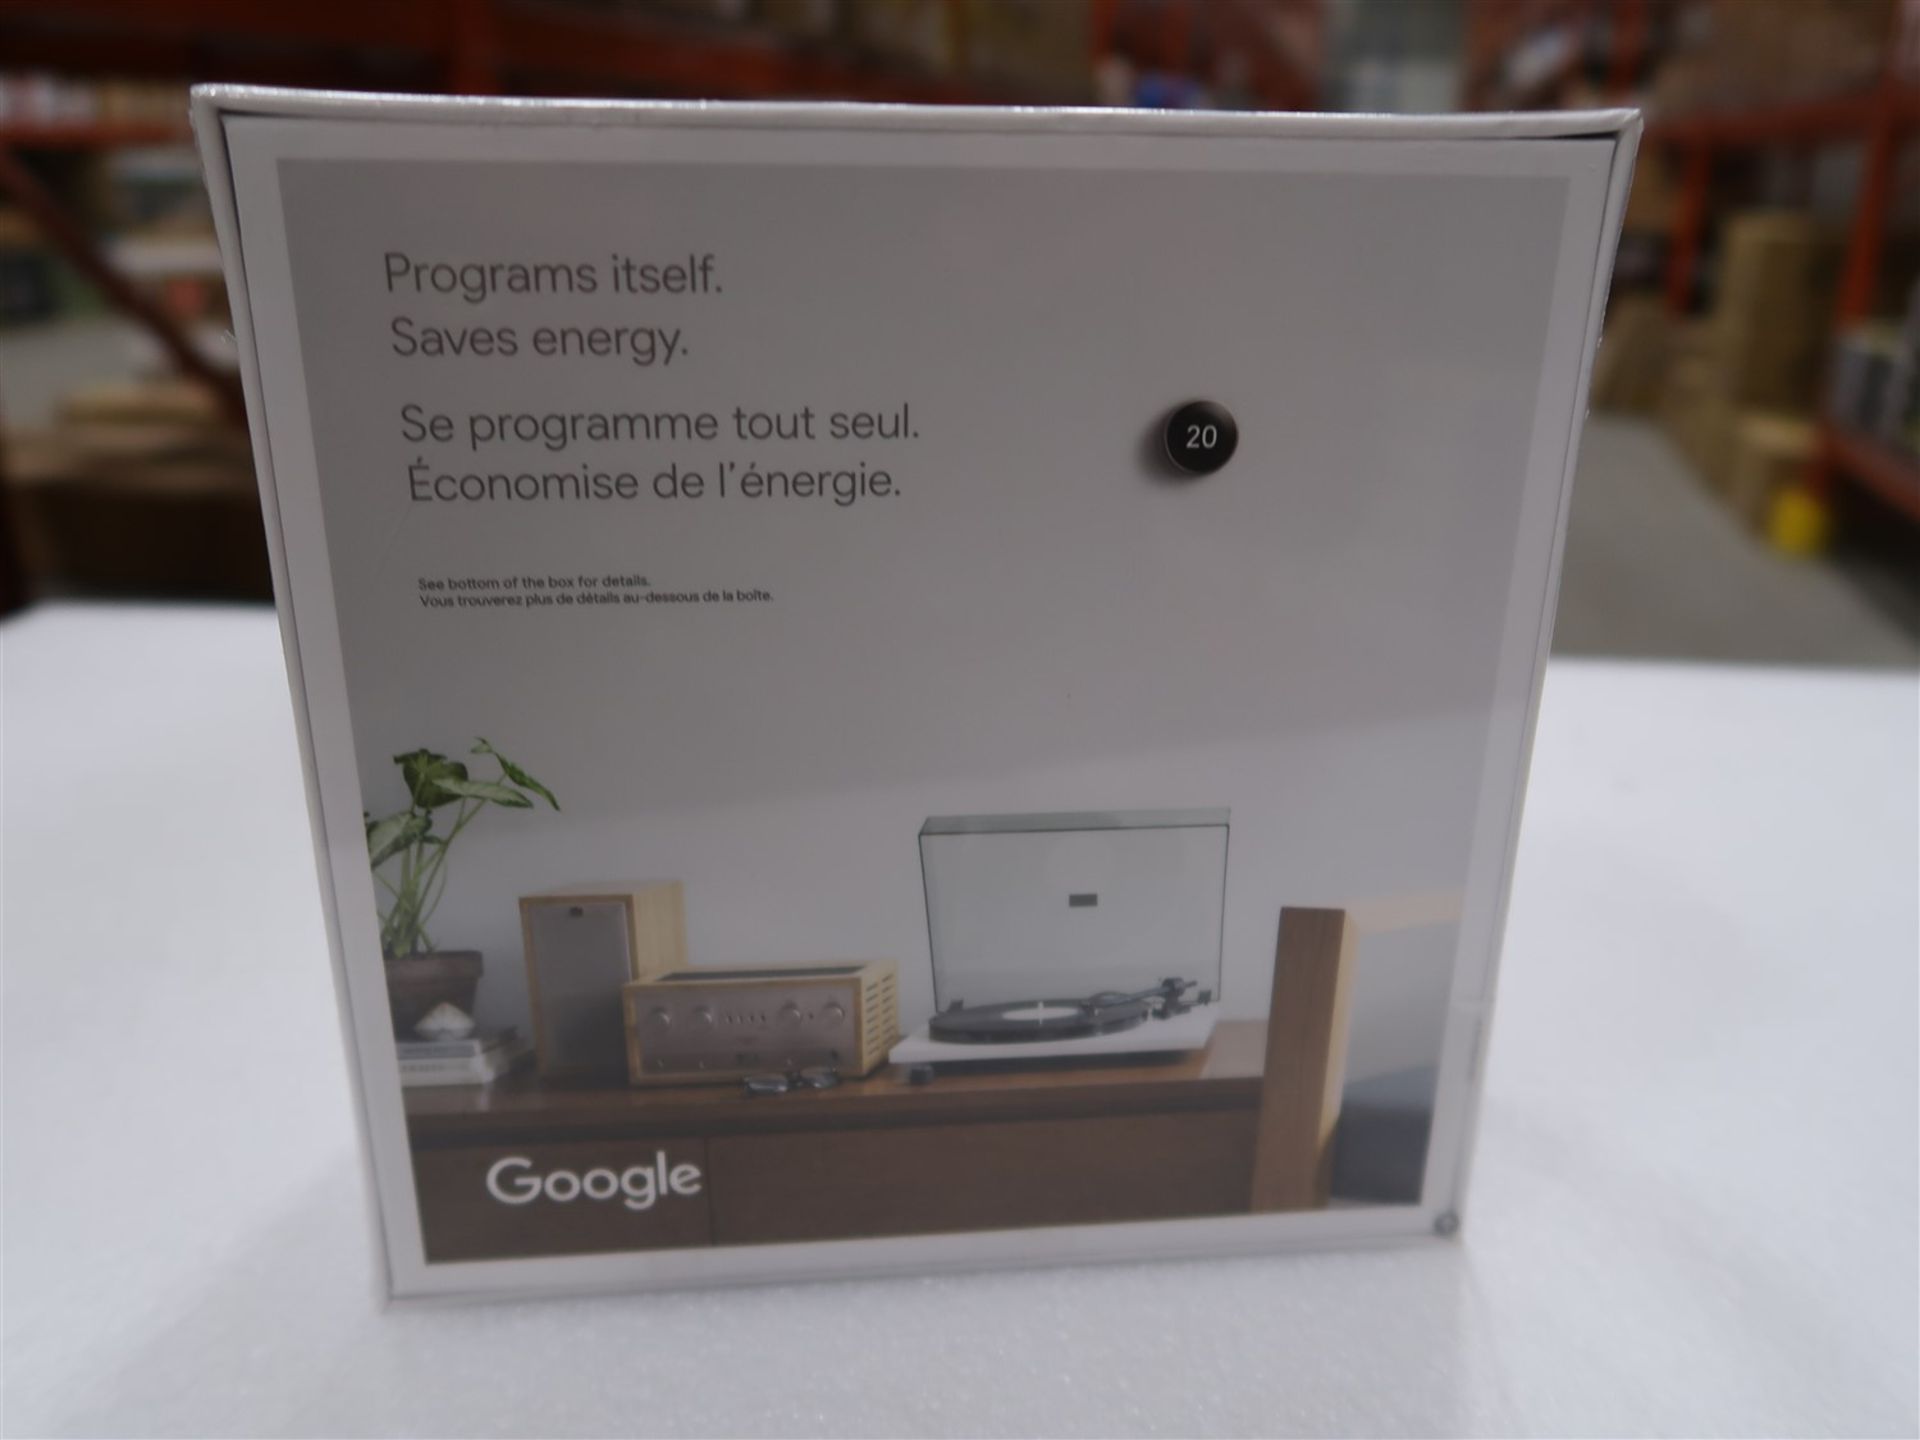 GOOGLE NEST WIFI LEARNING THERMOSTAT STAINLESS STEEL, (BNIB) - Image 2 of 6